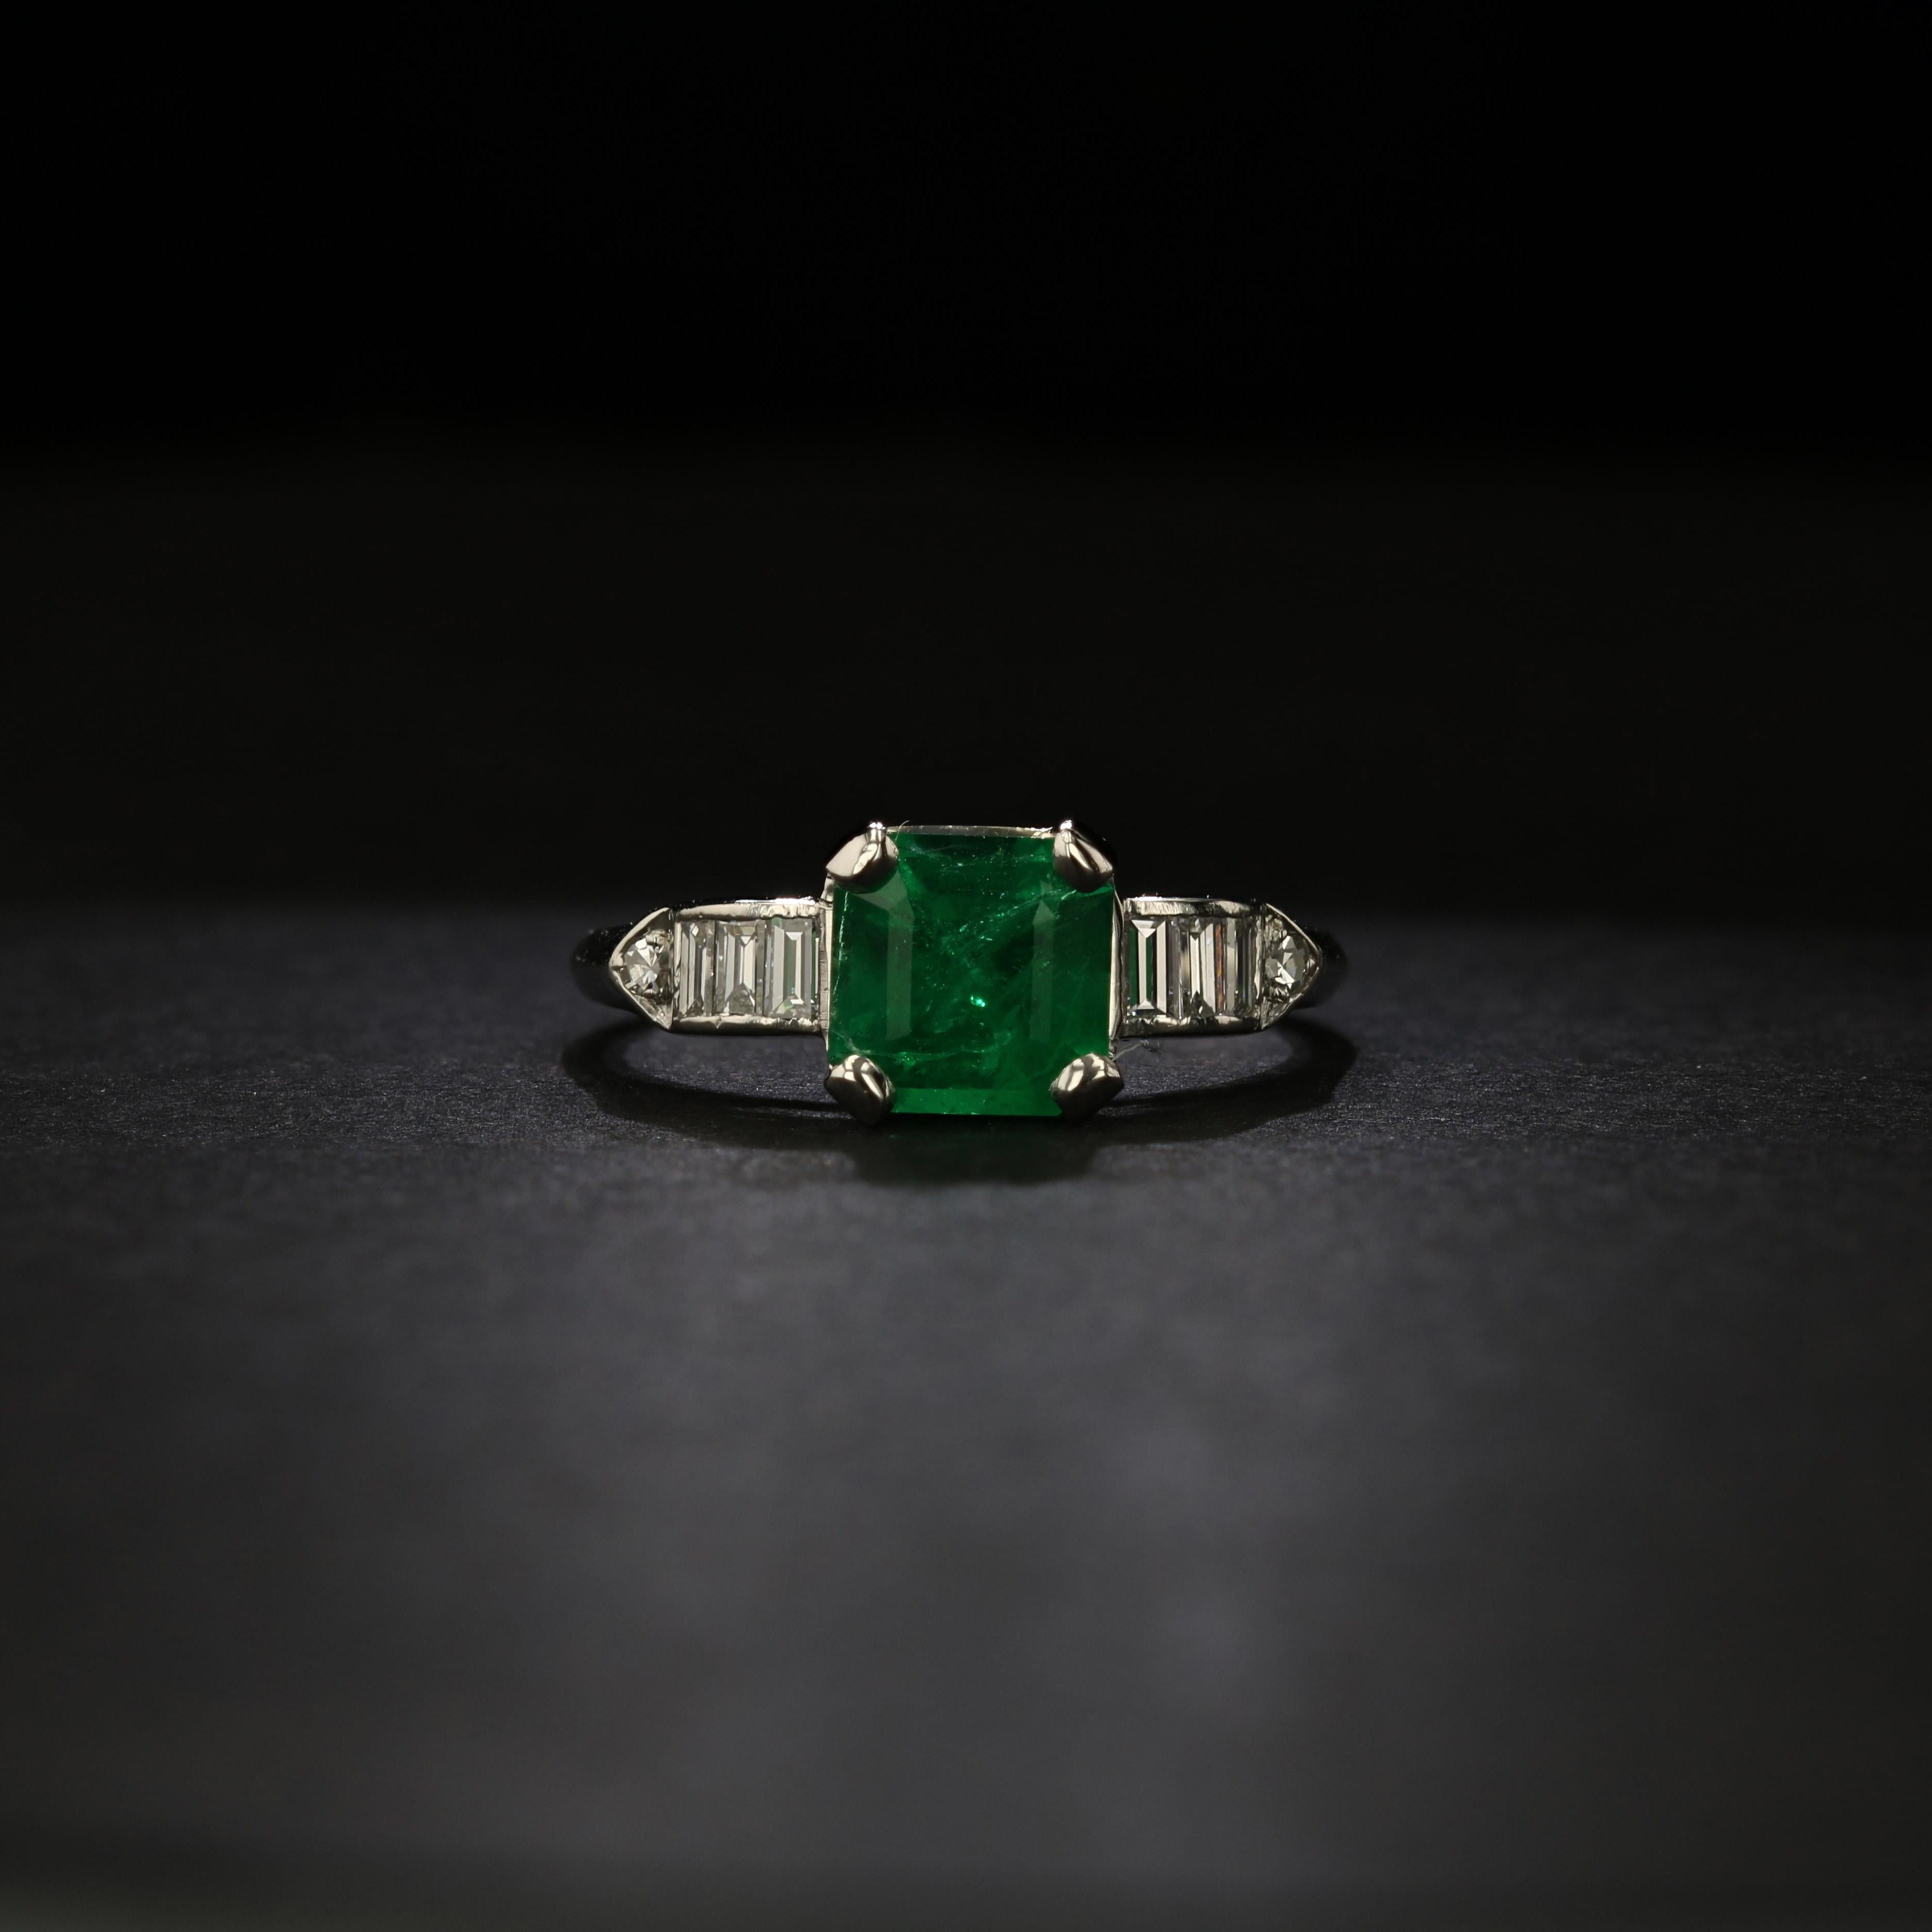 An emerald-cut green emerald is the feature of this estate ring crafted in polished platinum. A half dozen baguette diamonds and a pair of round diamonds grace the shoulders of the ring for added shine.

The emerald weighs approximately 1.17 carat